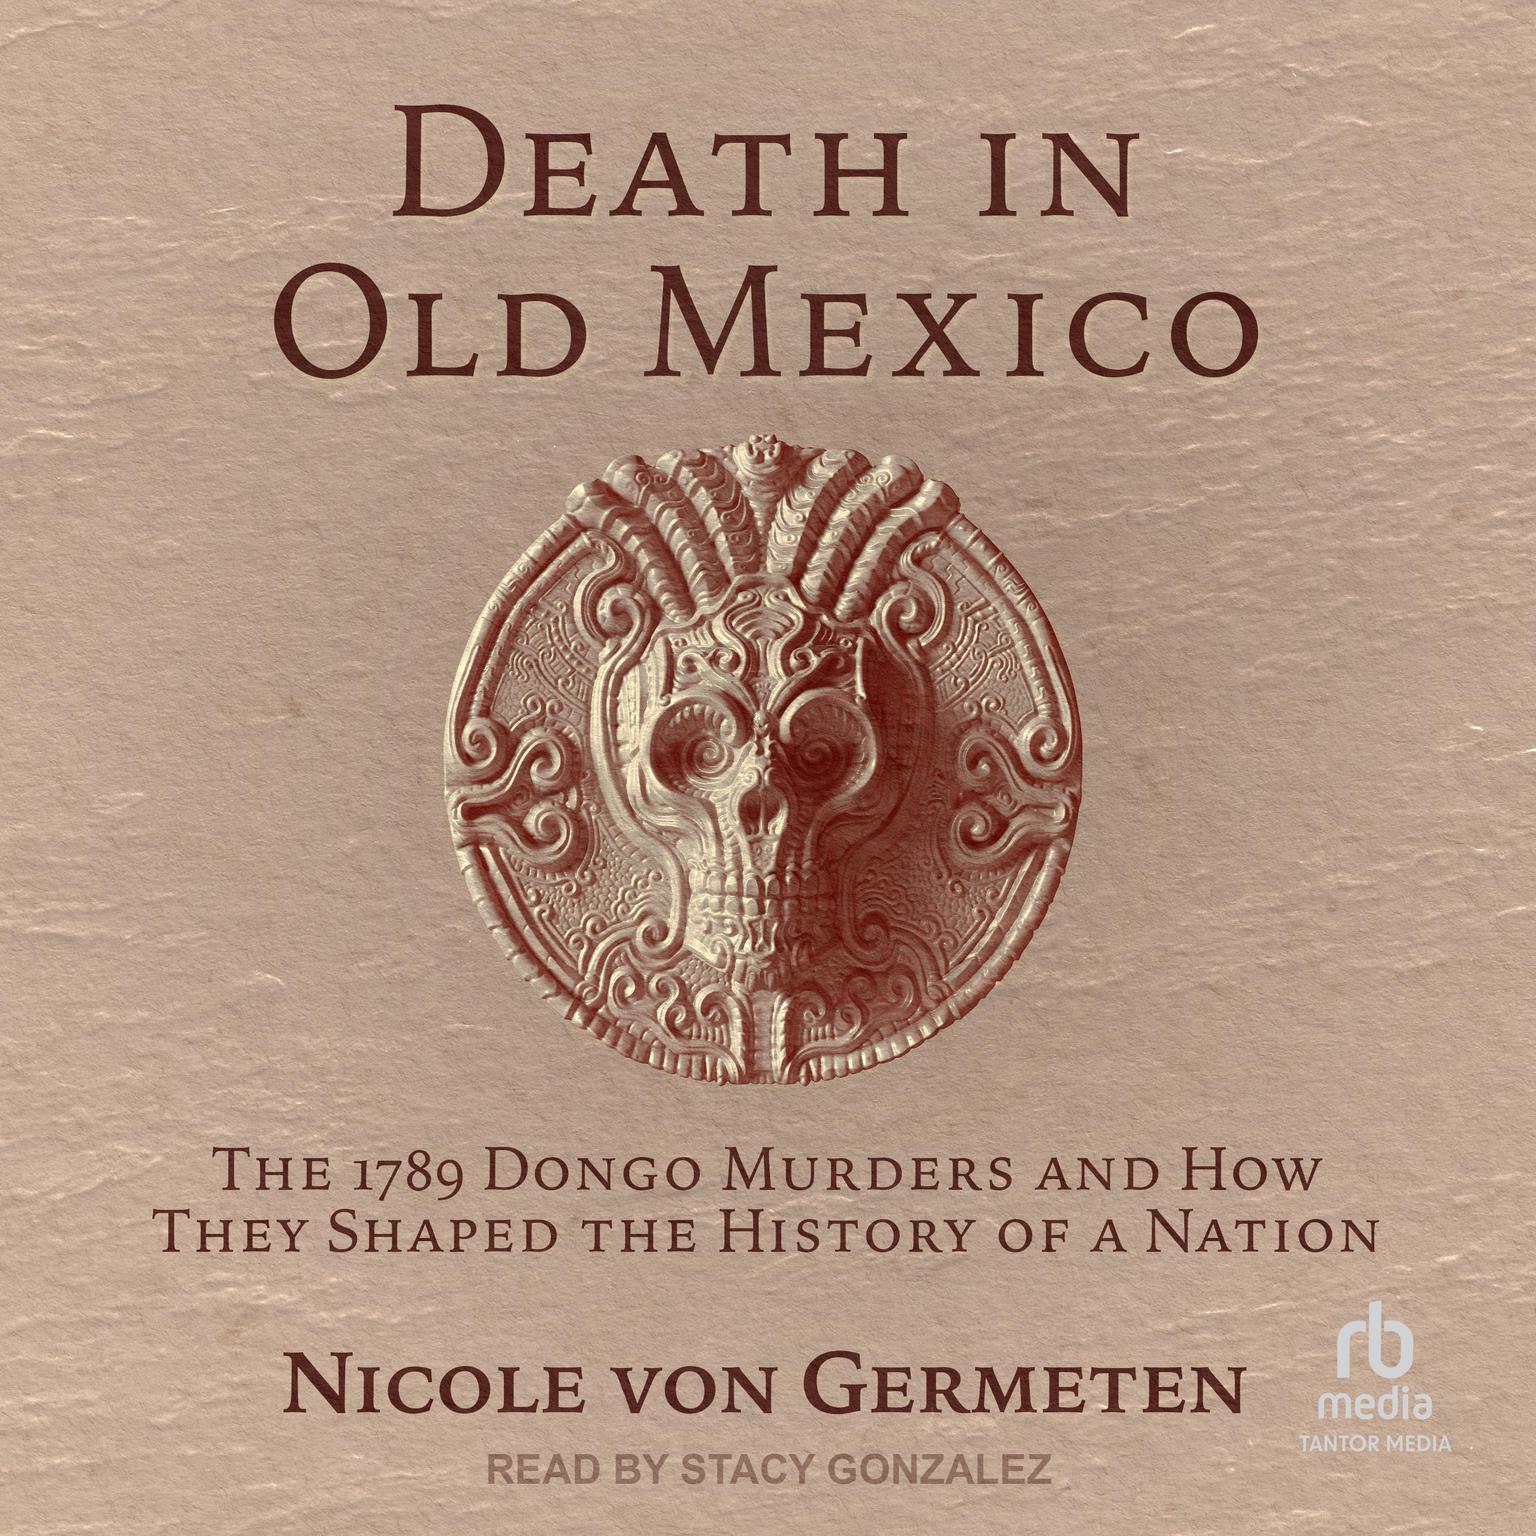 Death in Old Mexico: The 1789 Dongo Murders and How They Shaped the History of a Nation Audiobook, by Nicole von Germeten